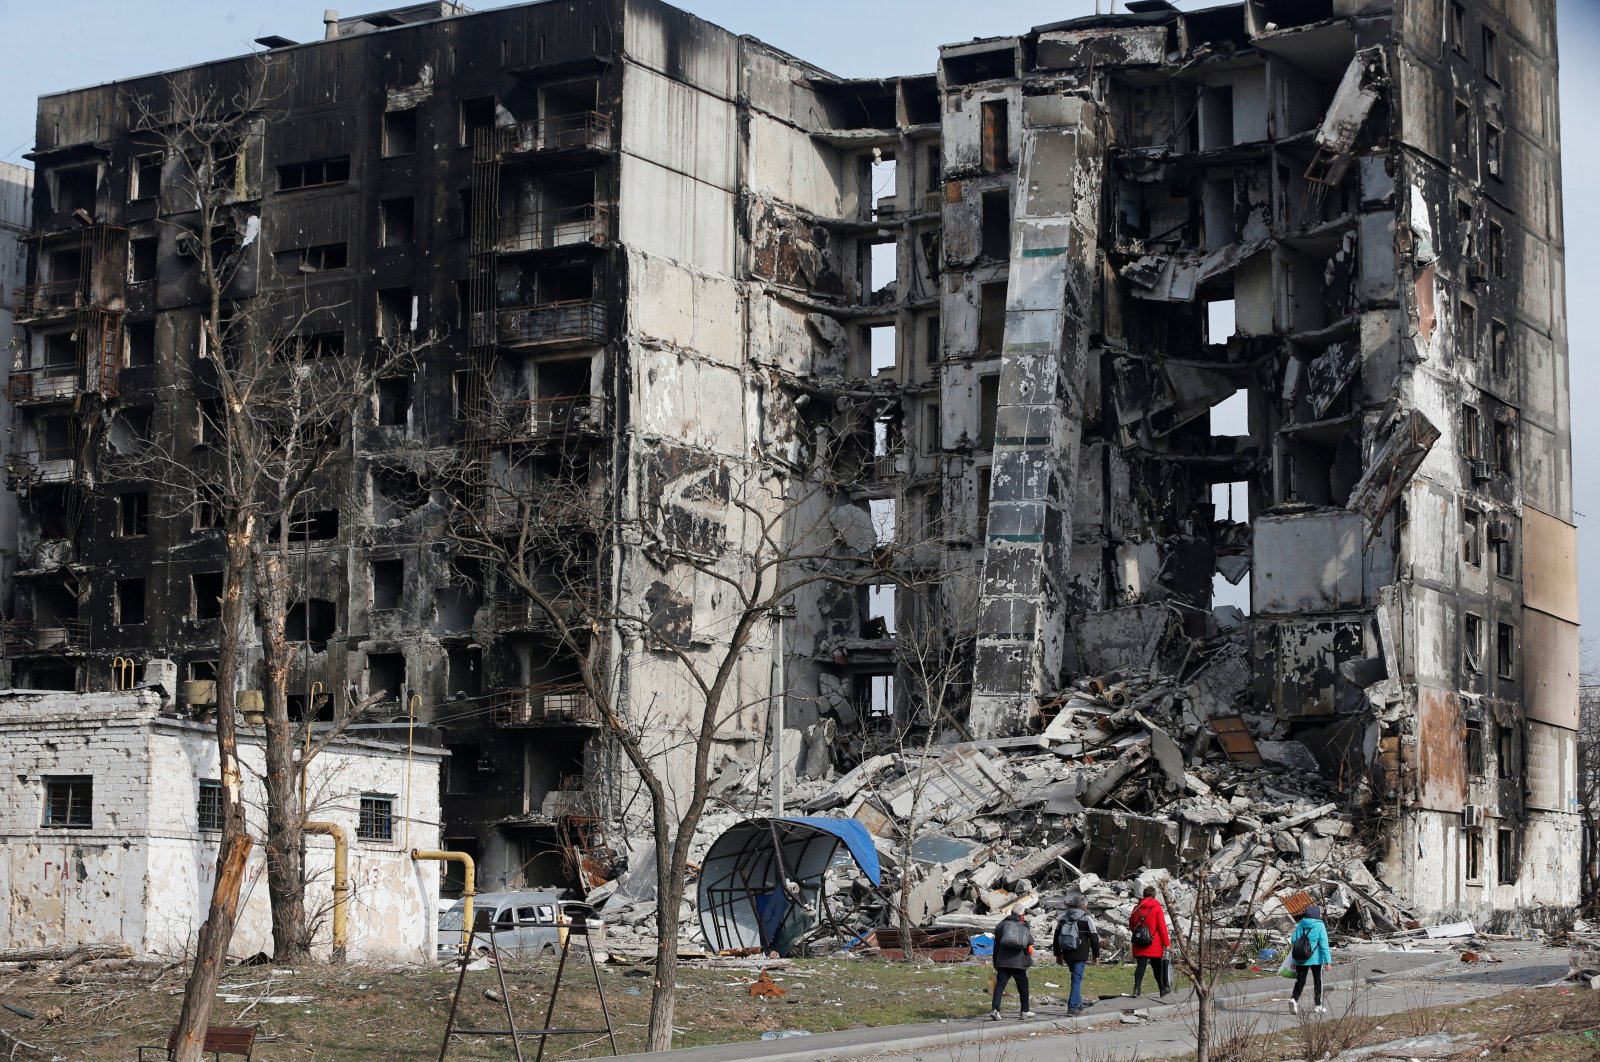 Local residents walk near an apartment building destroyed during the Ukraine-Russia conflict in the besieged southern port city of Mariupol, Ukraine, March 30, 2022. (Reuters Photo)